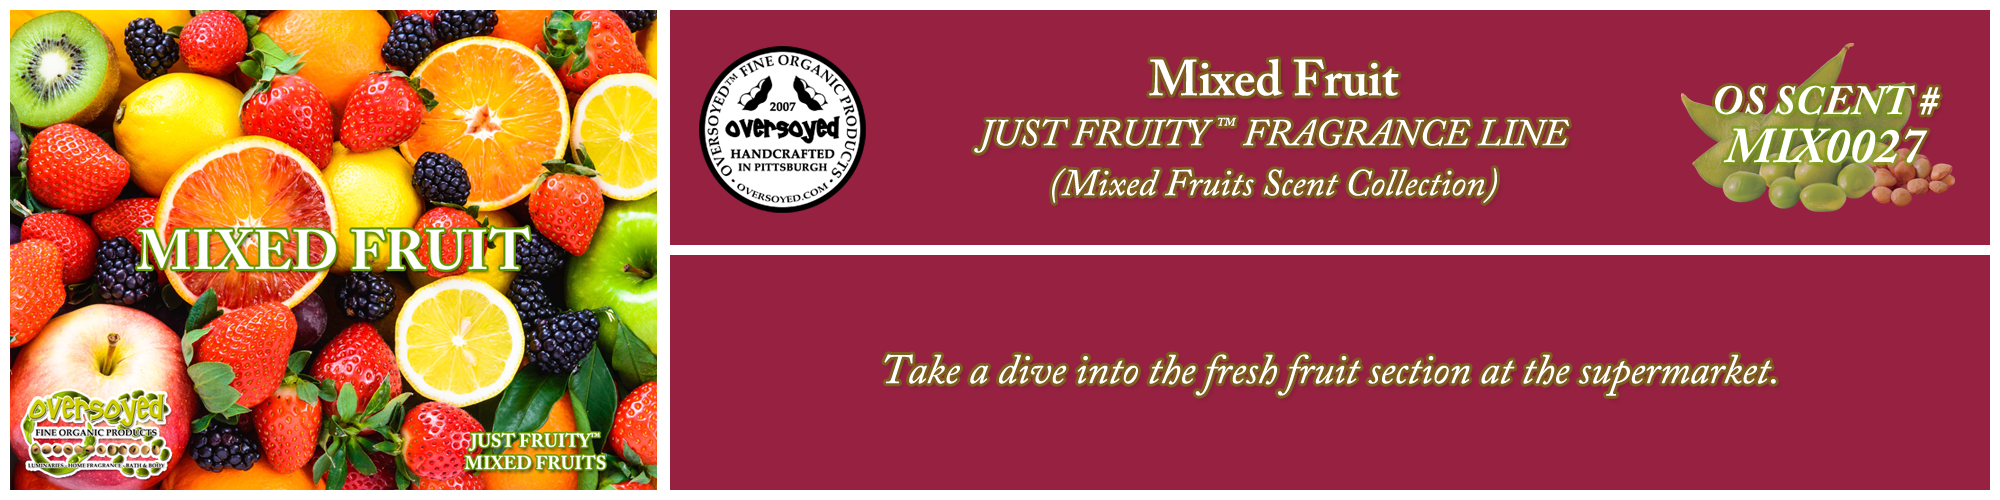 Mixed Fruit Handcrafted Products Collection